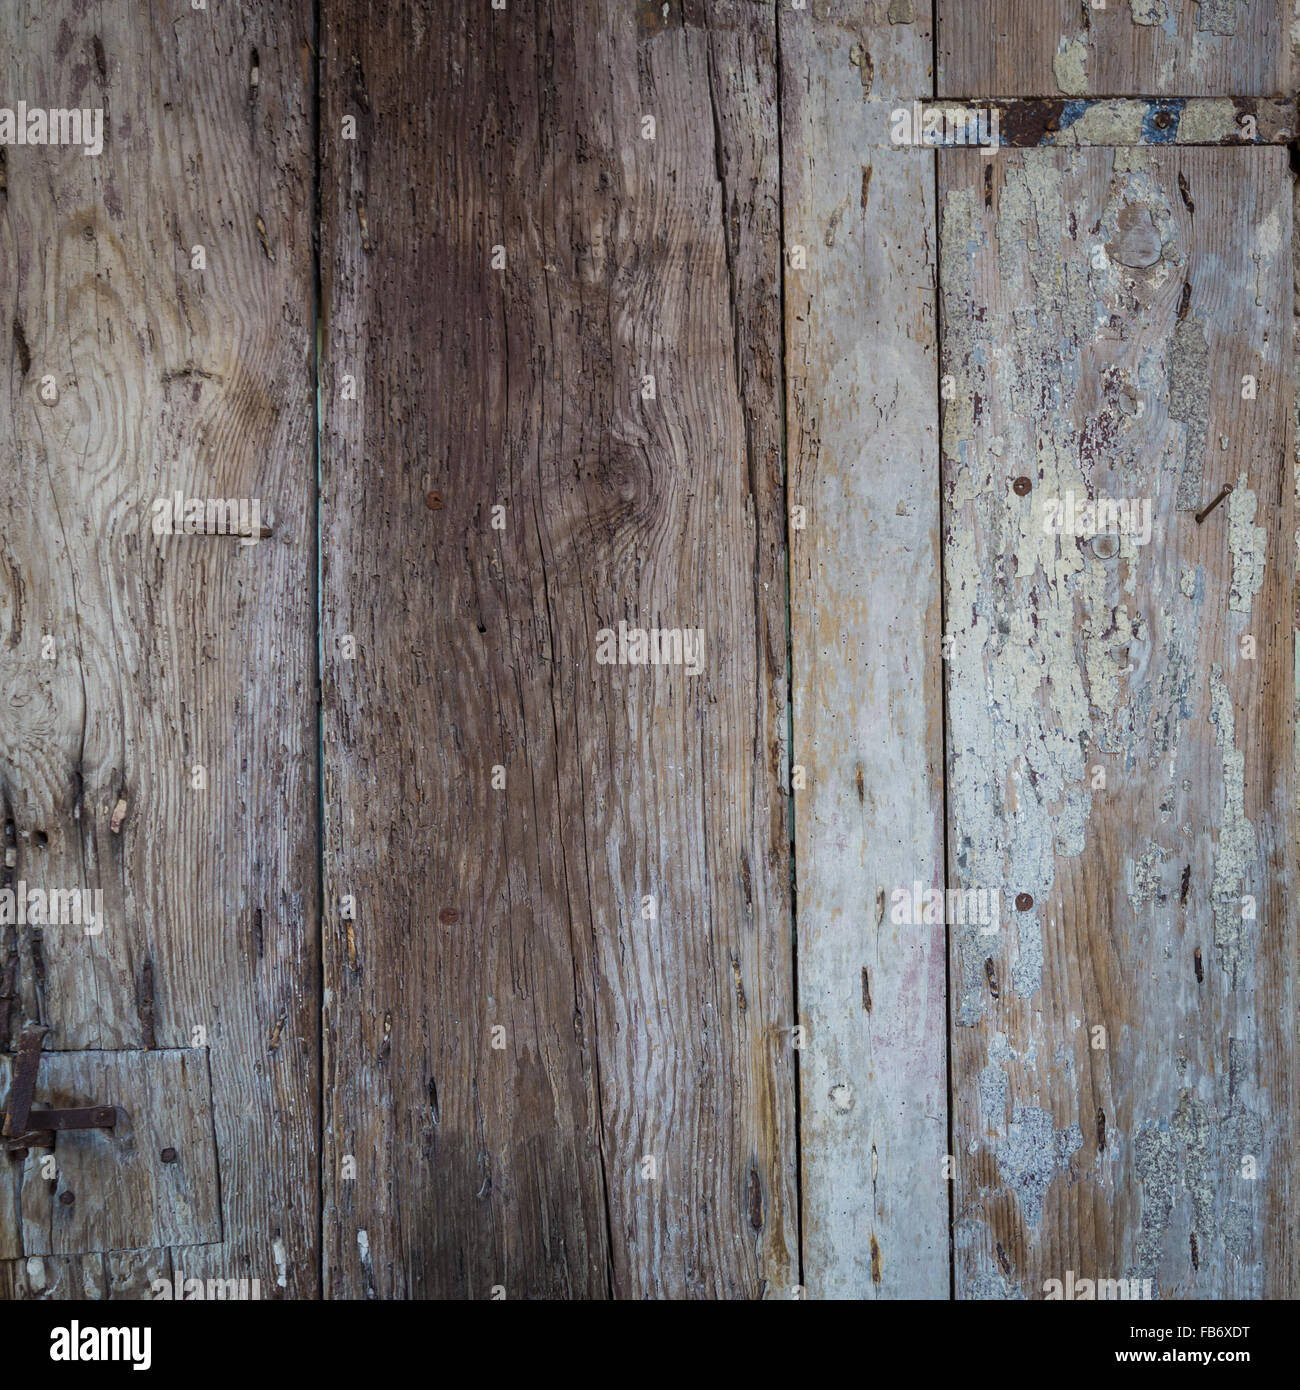 Medieval texture wood Stock Photo